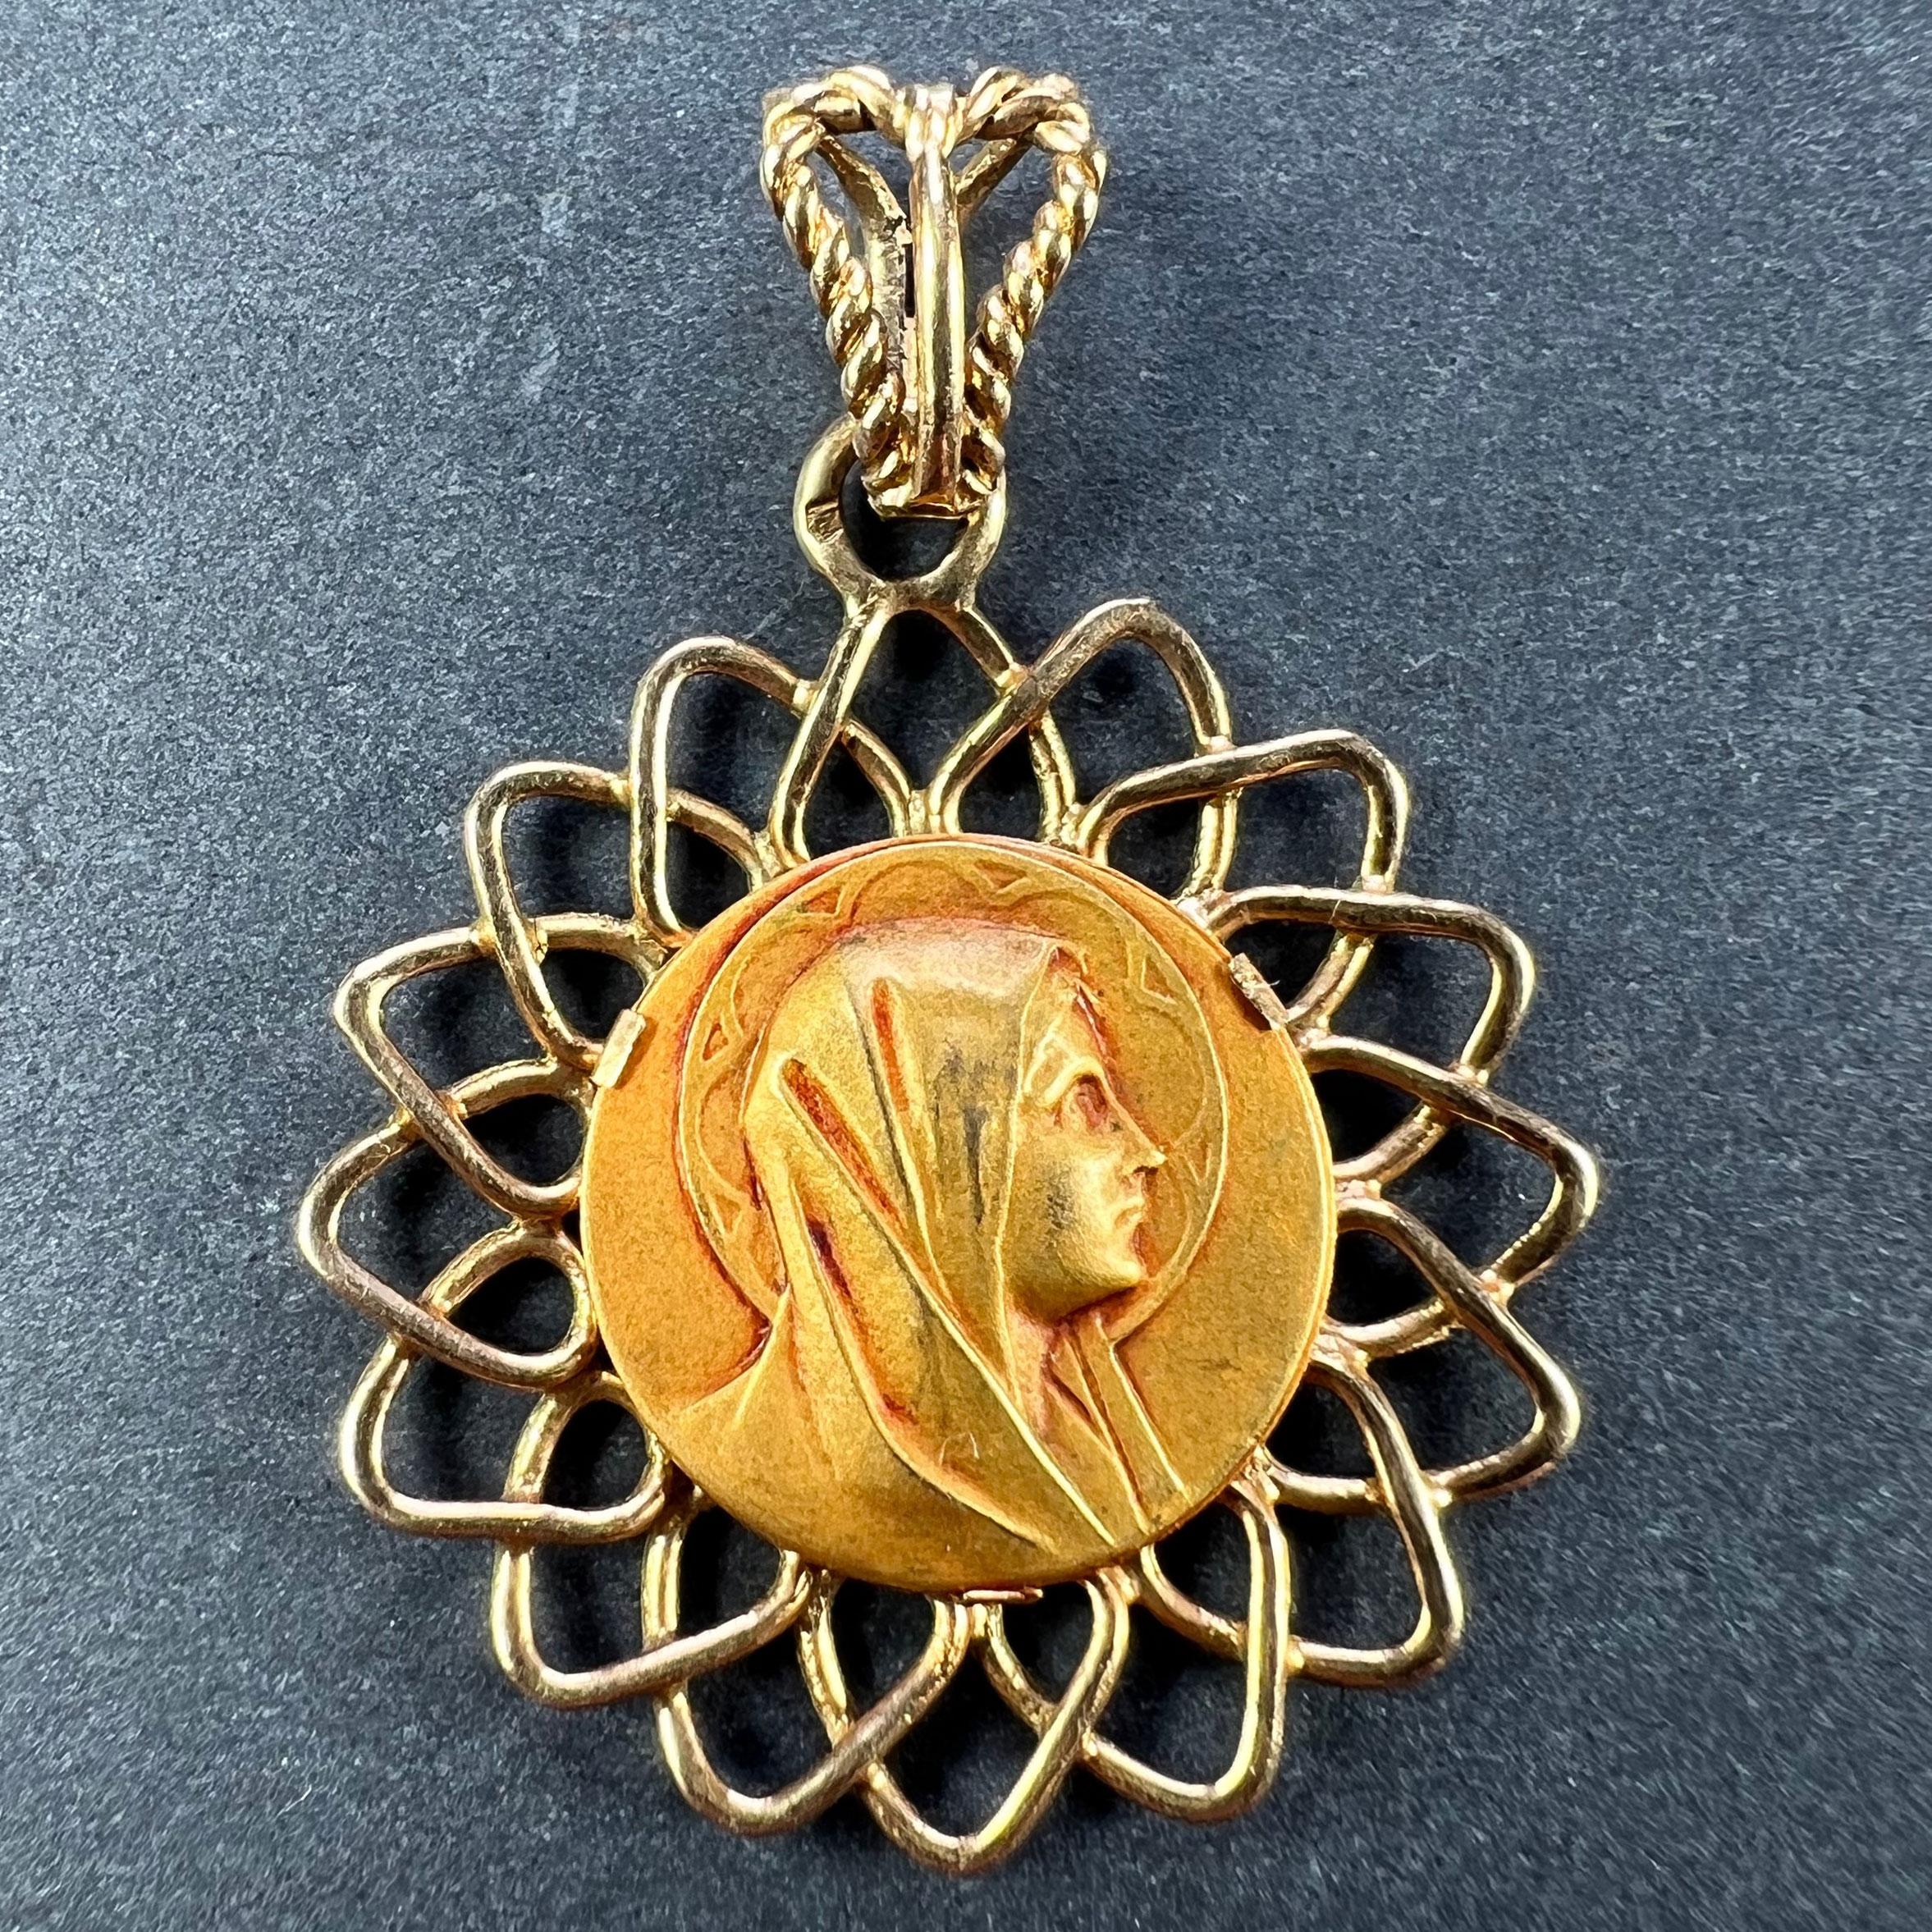 A French 18 karat (18K) yellow gold pendant designed as a round medal depicting the Virgin Mary within a halo within a radiating fretwork gold wire frame. Stamped with the eagle’s head for French manufacture and 18 karat gold, with an unknown